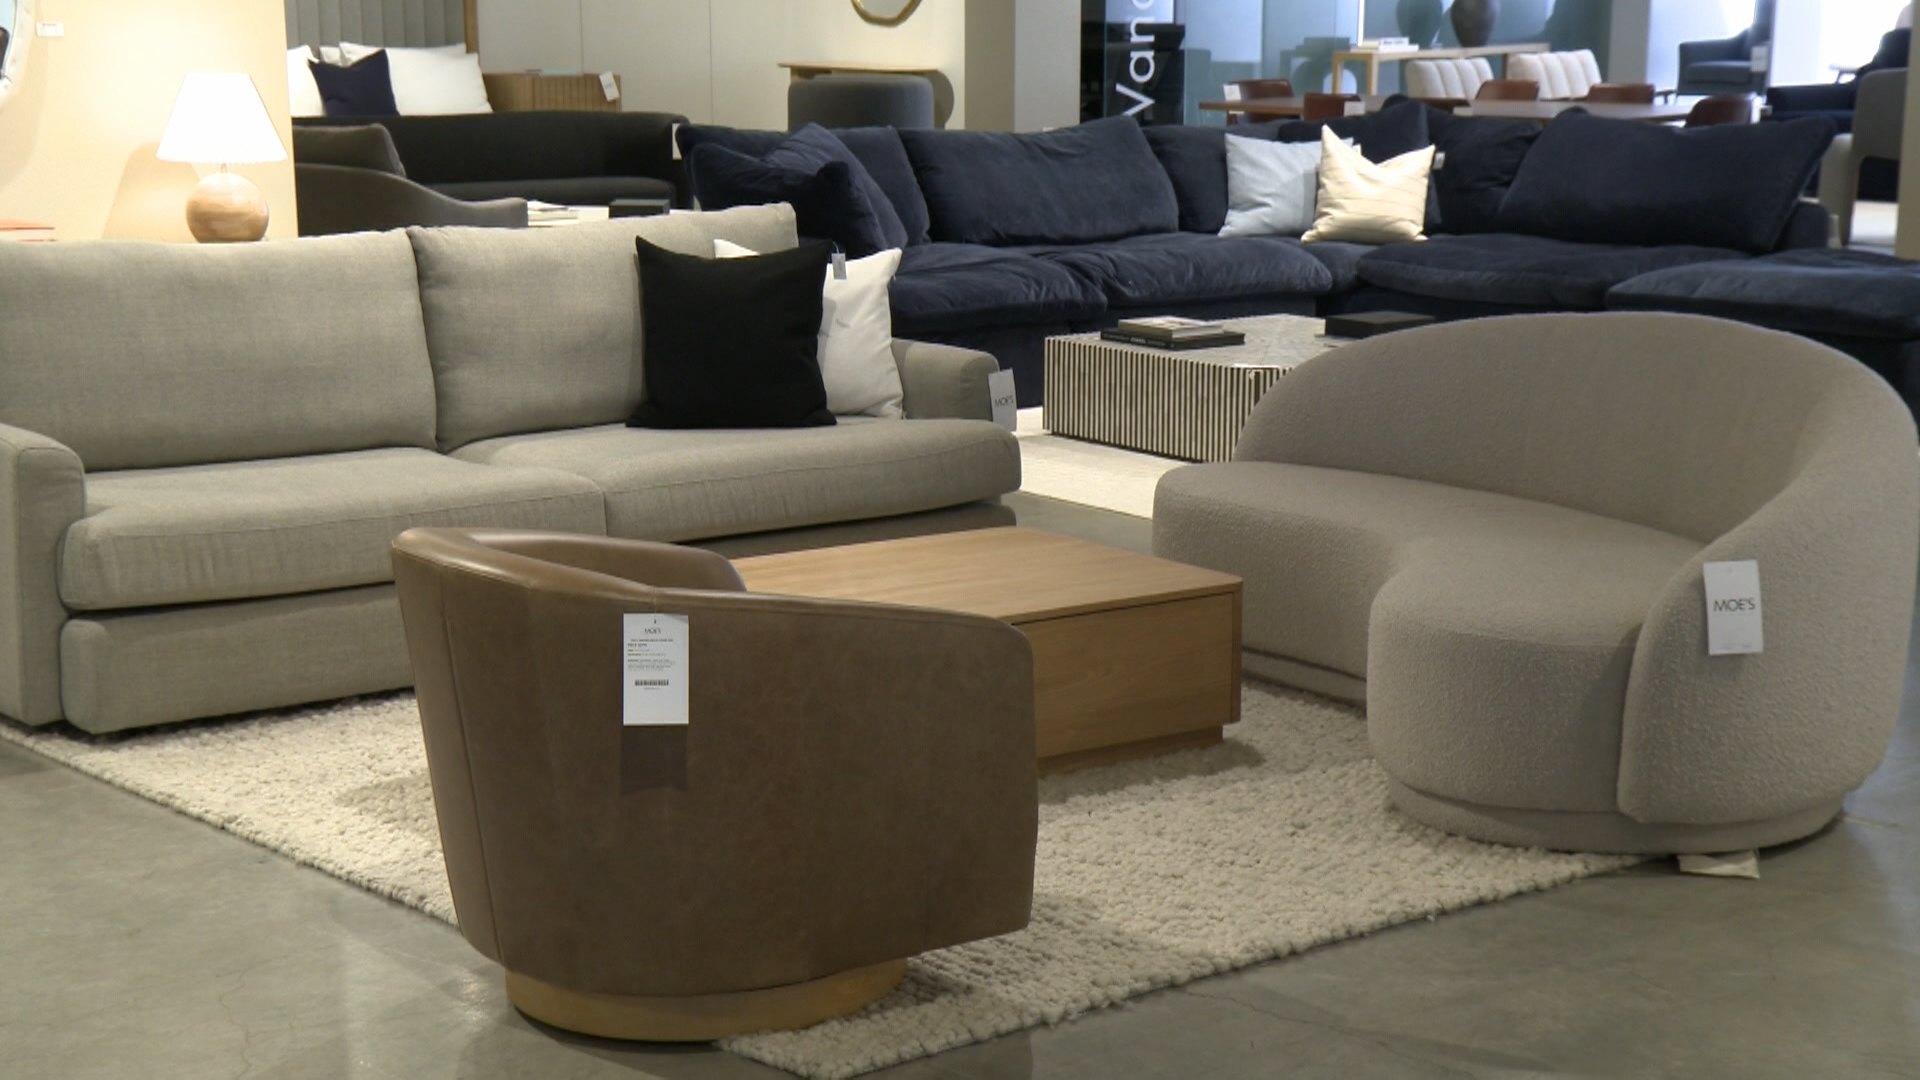 Potential furniture import tariff hike could cause price spike